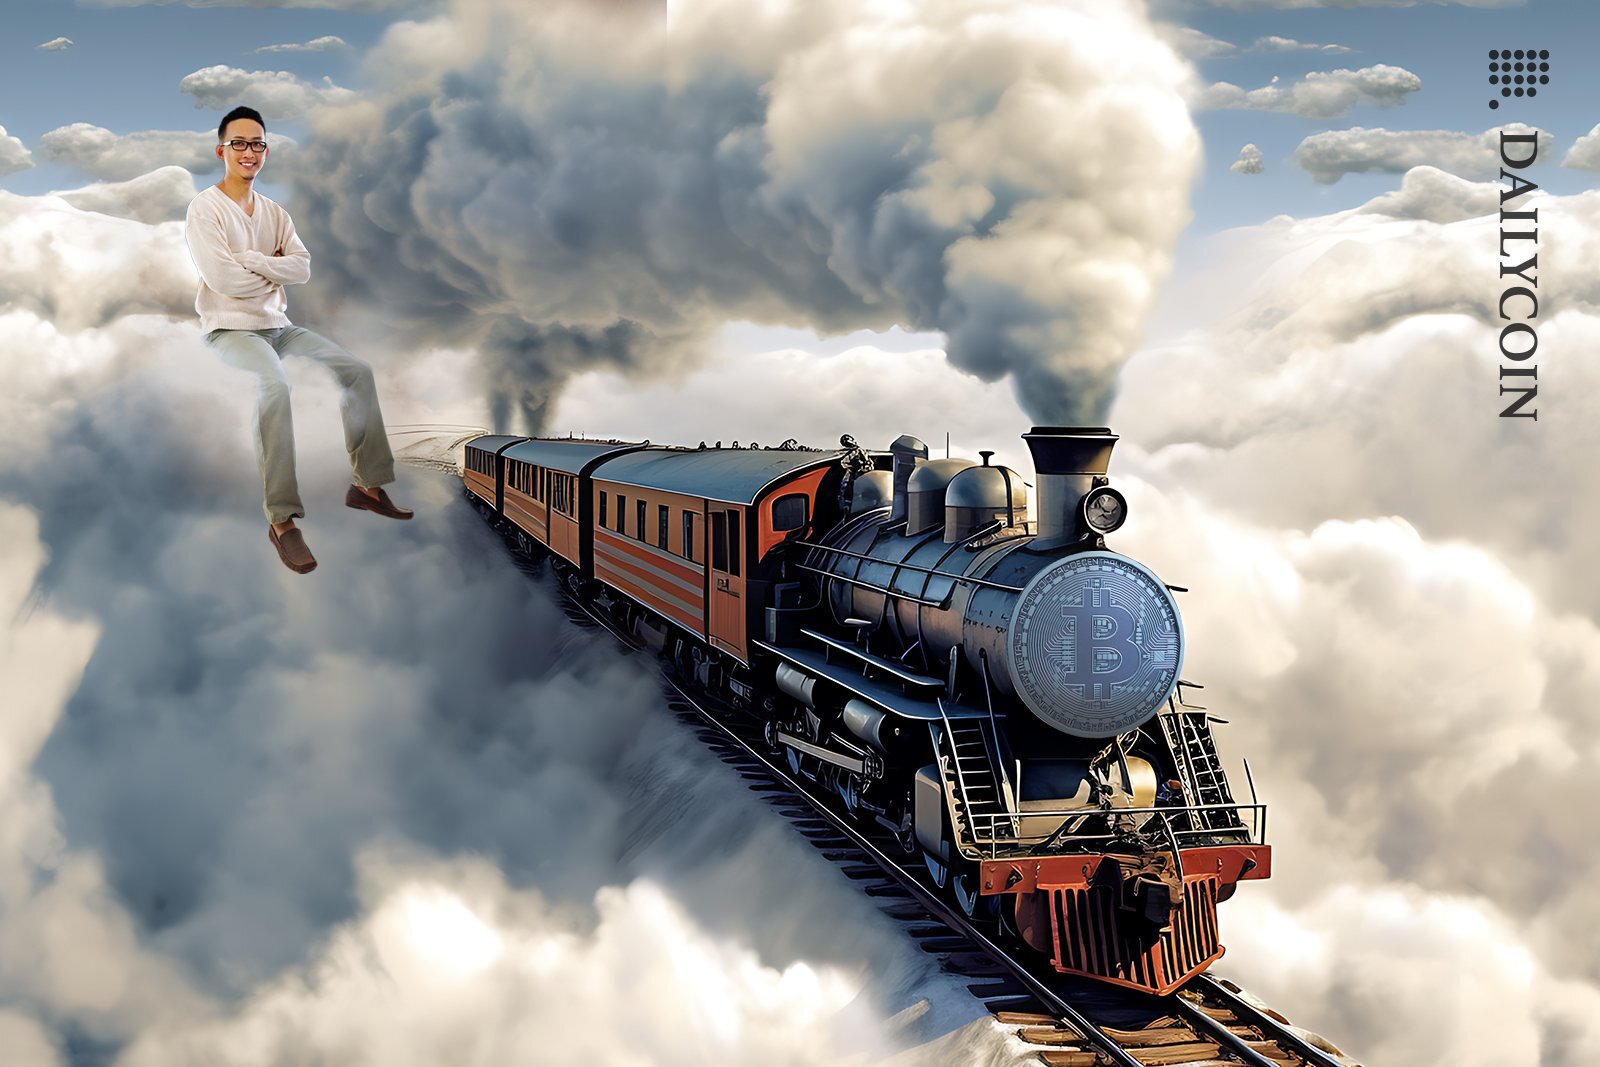 Guy sitting on the cloud watching the Bitcoin steam train riding in the sky.